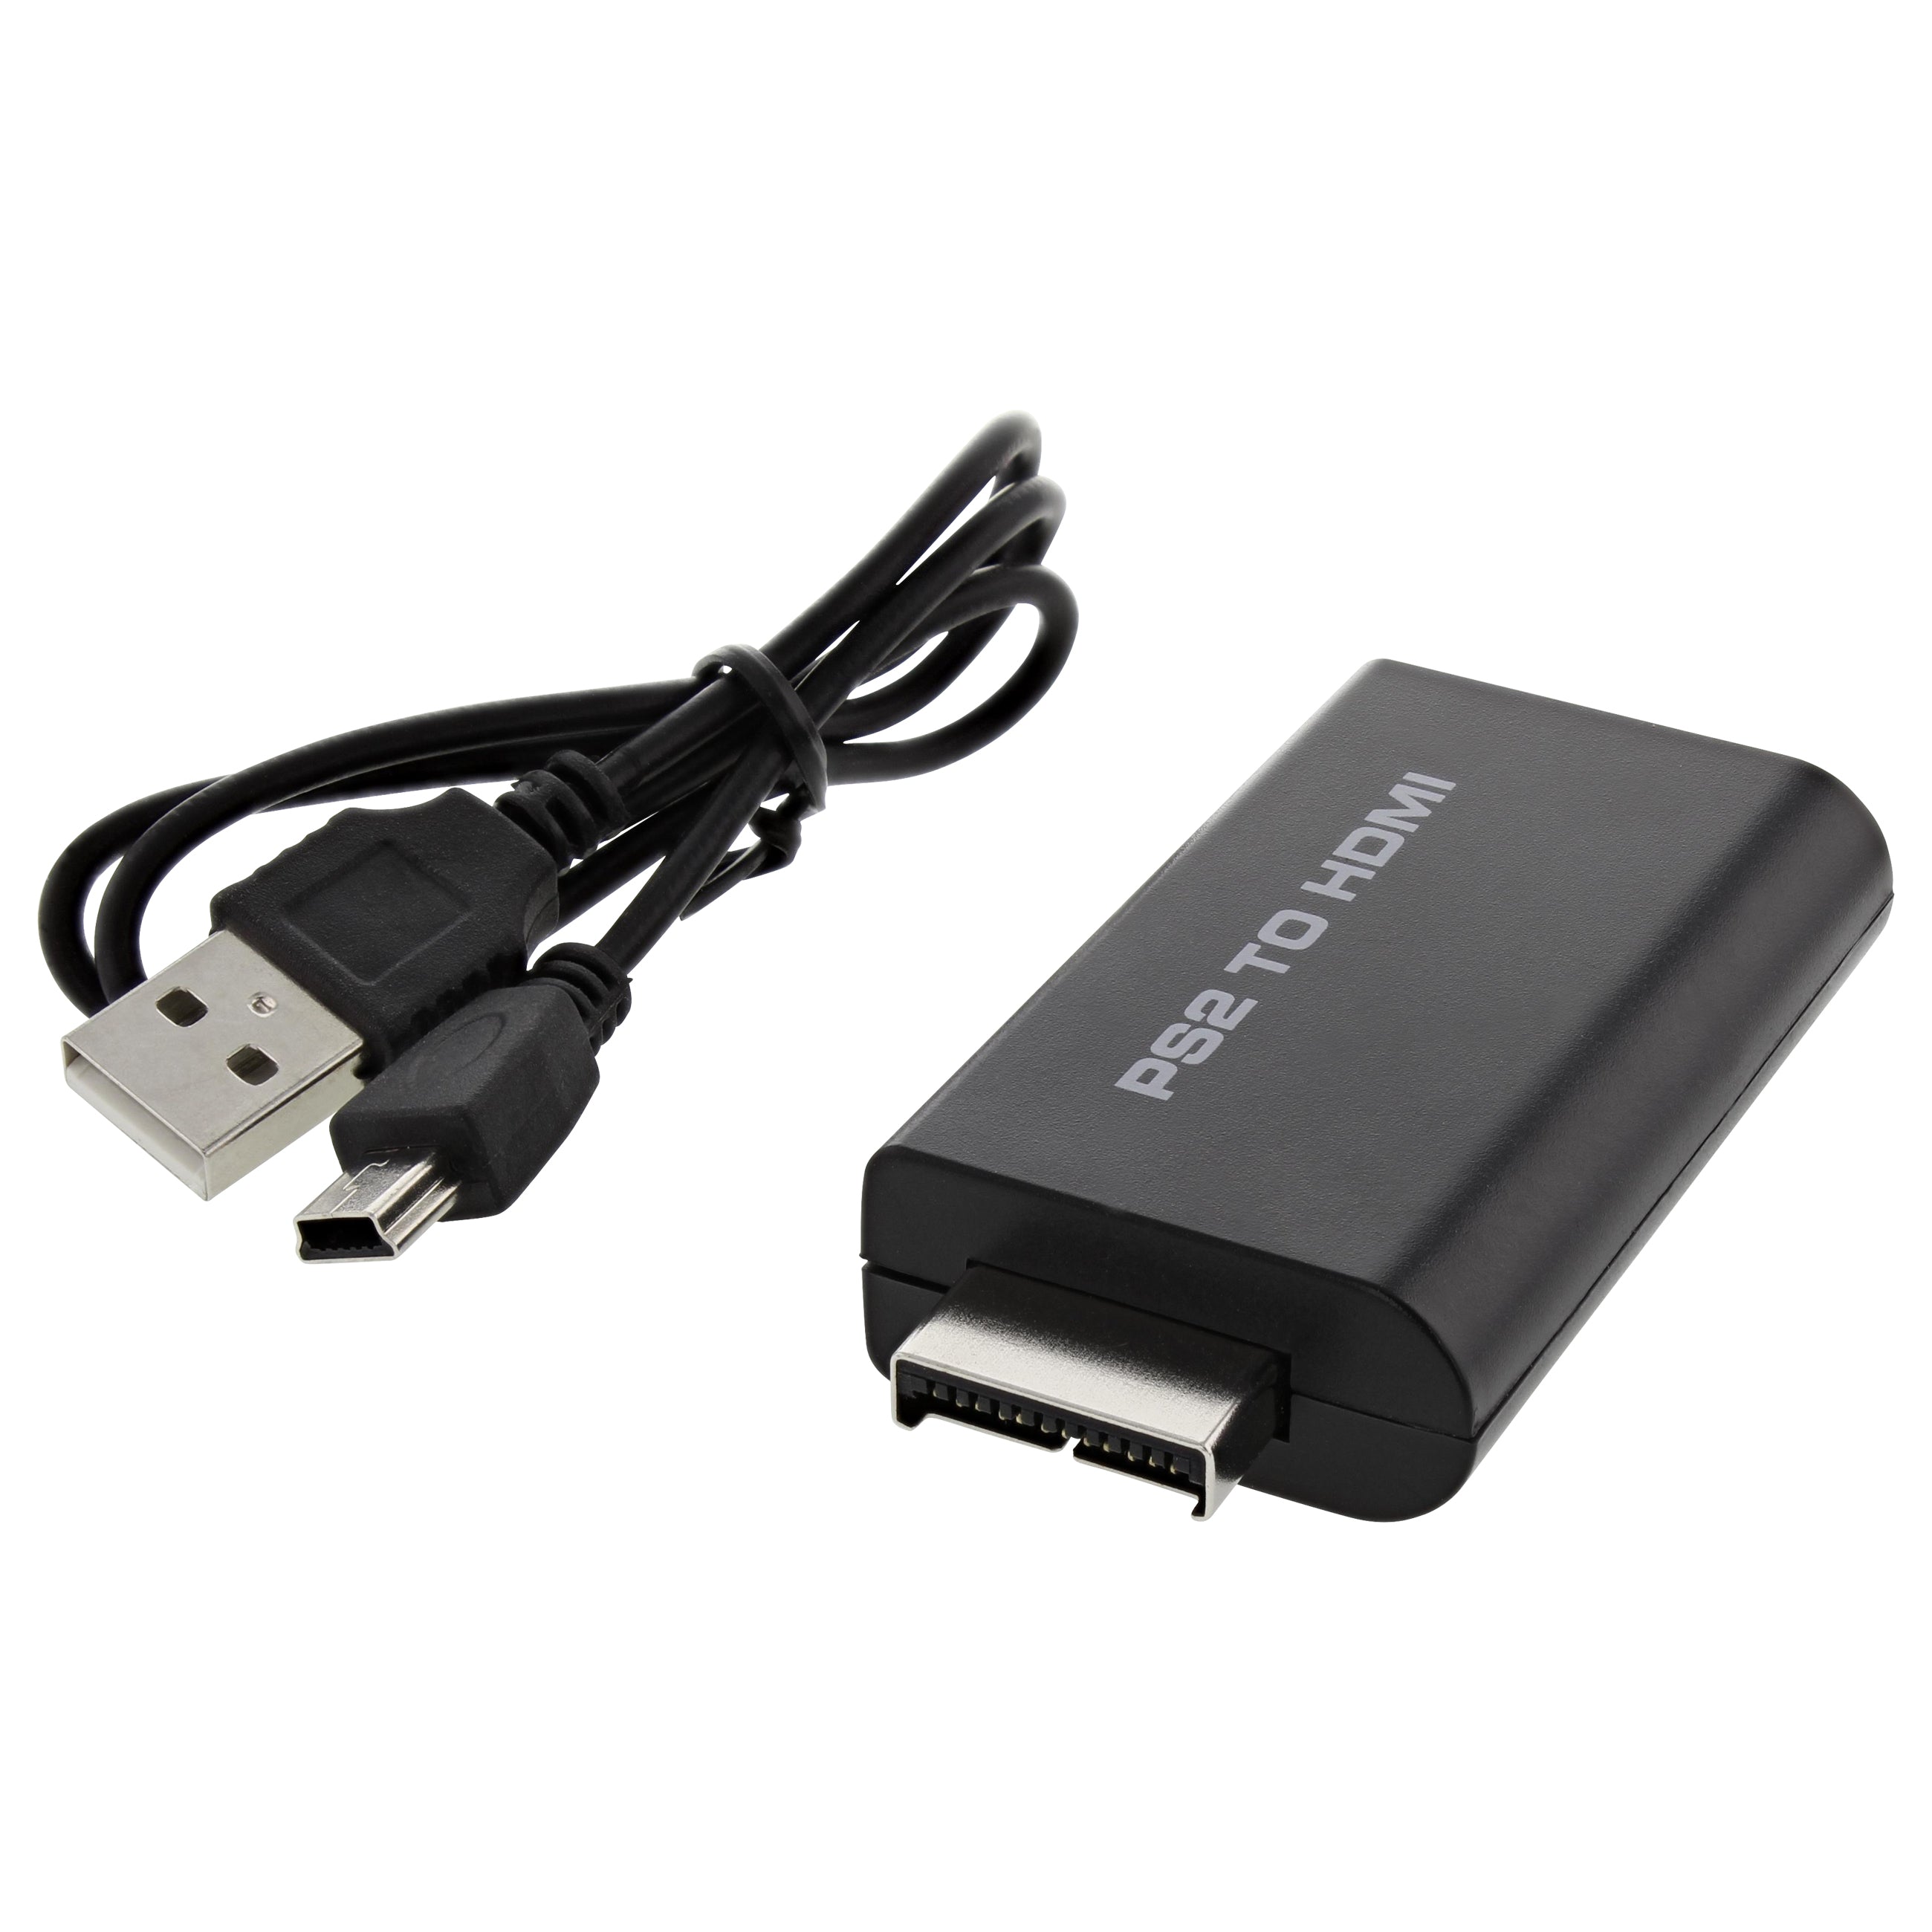 HDMI adapter for Sony PS2 PlayStation 2 console - black